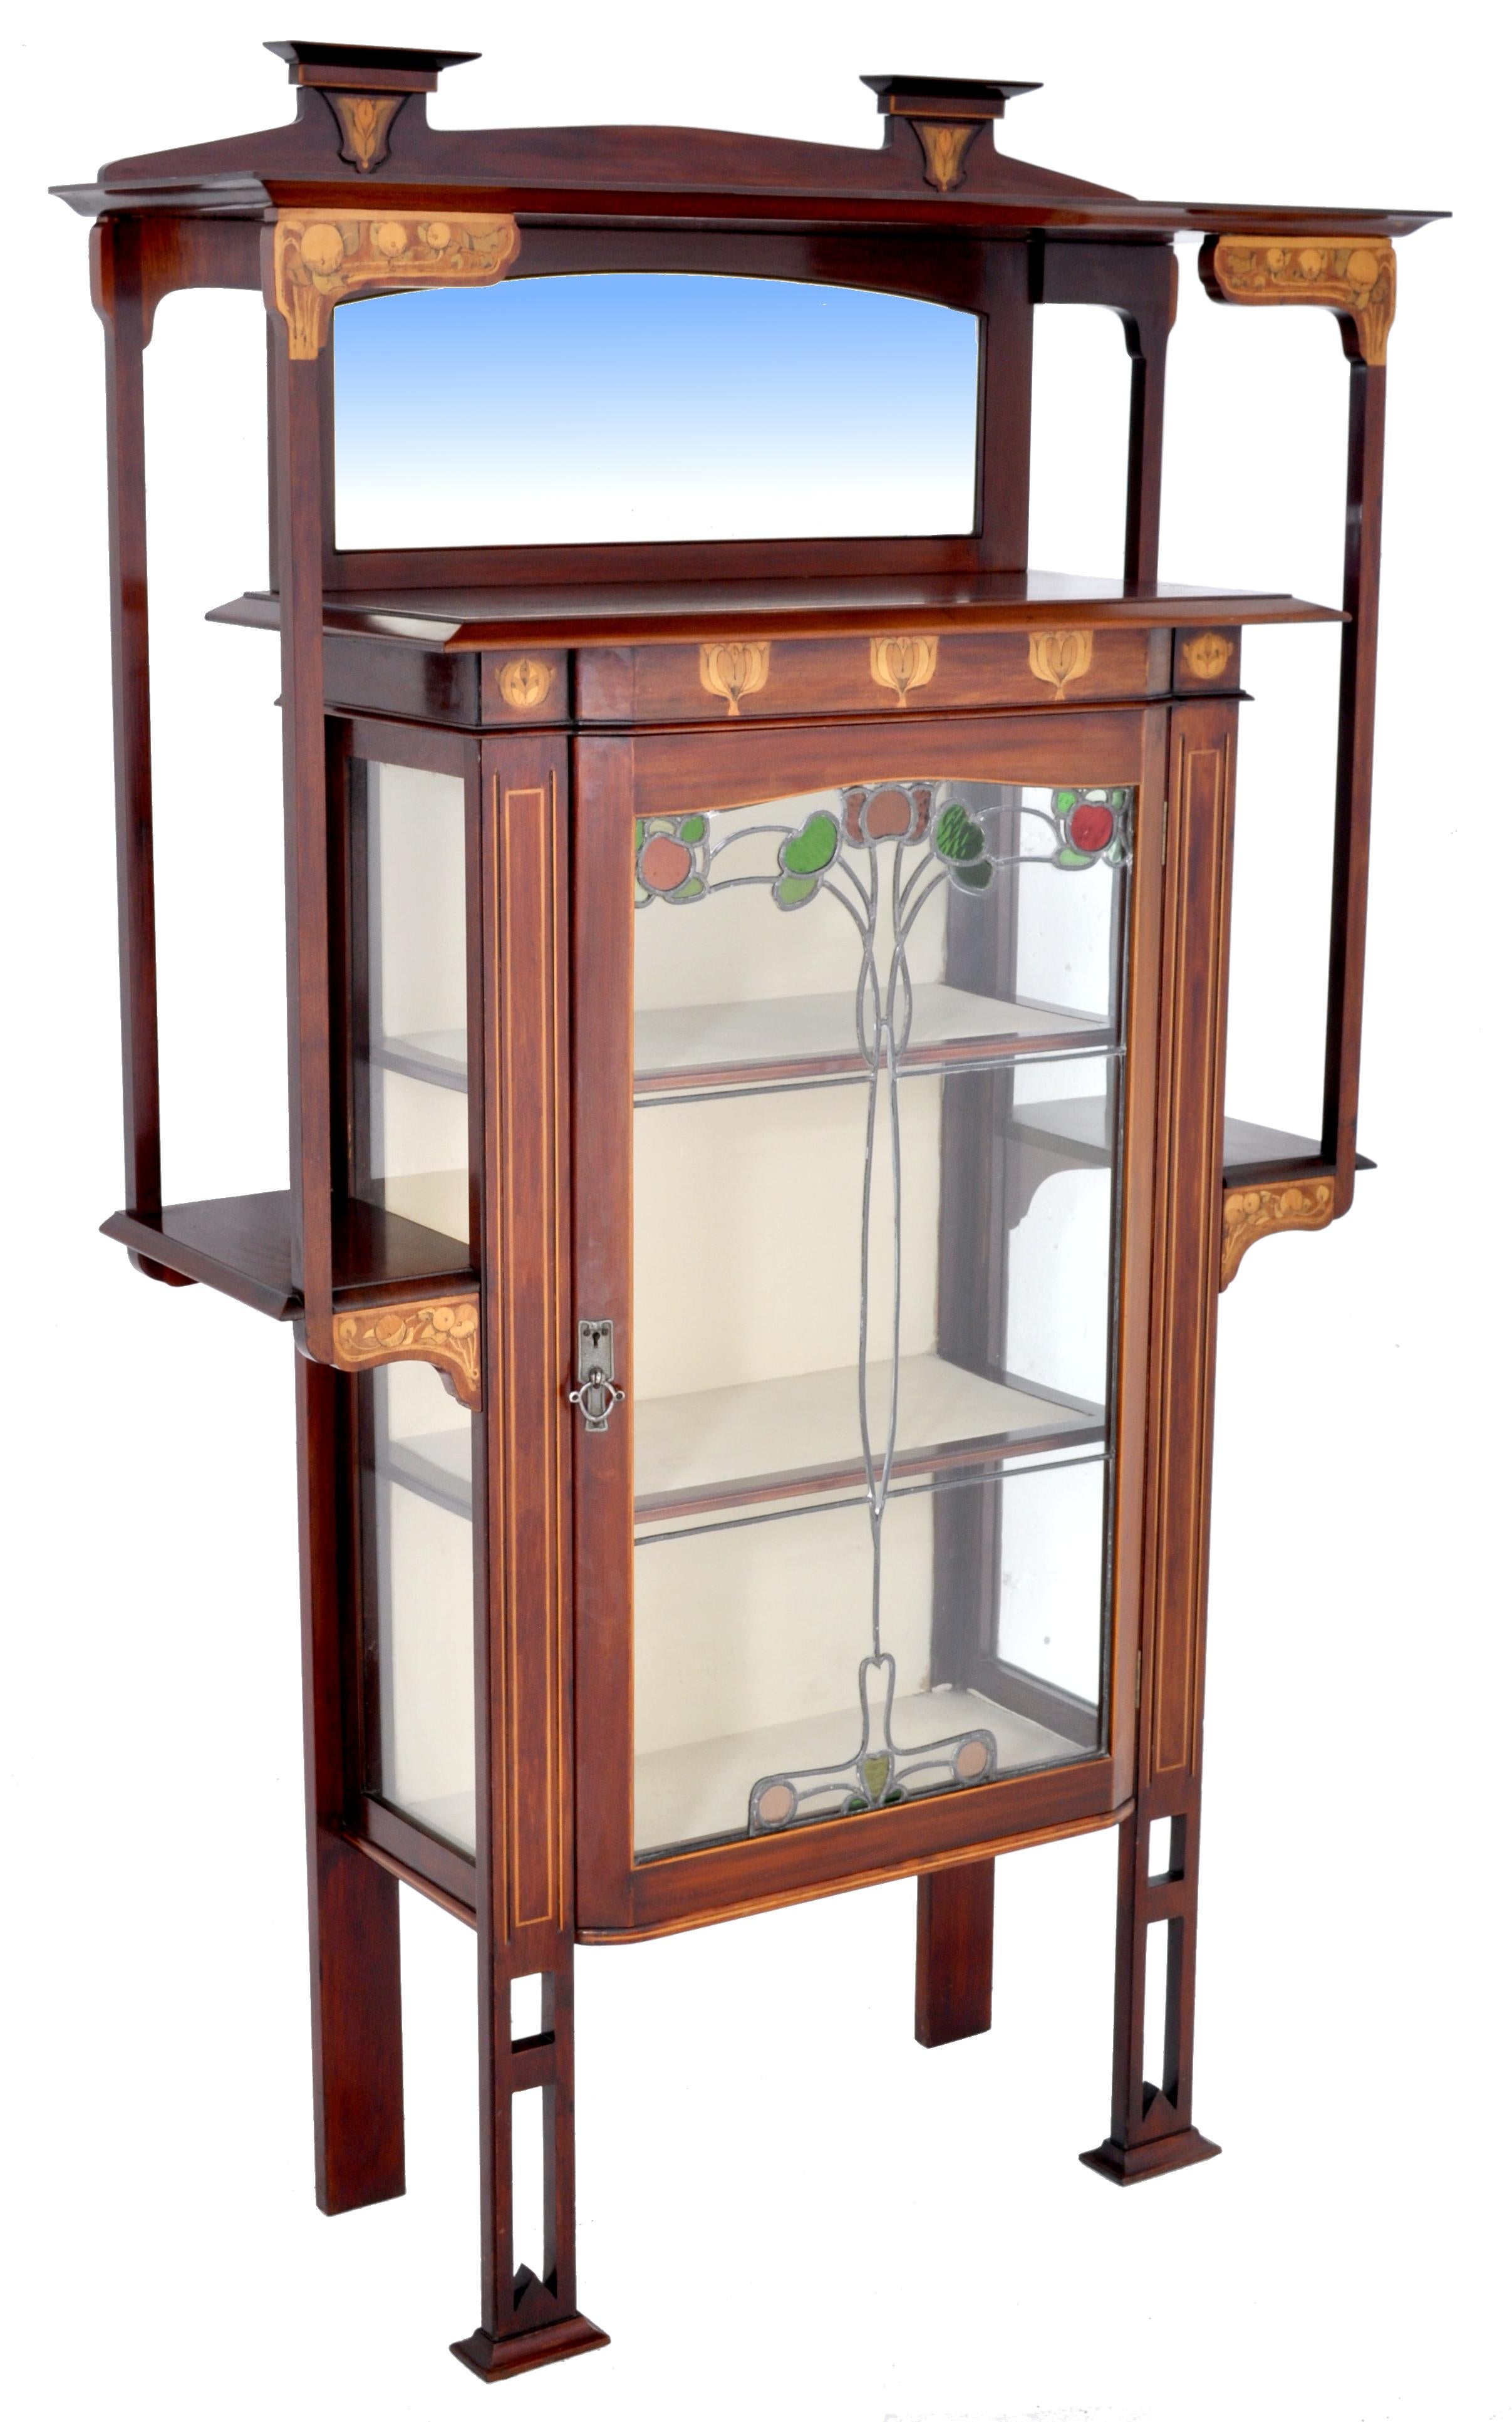 Antique Art Nouveau inlaid mahogany China cabinet by Shapland & Petter for Liberty of London, circa 1900. The cabinet finely inlaid with Art Nouveau style tulip designs and fruiting persimmons. The cabinet having an arched beveled mirror to the top,